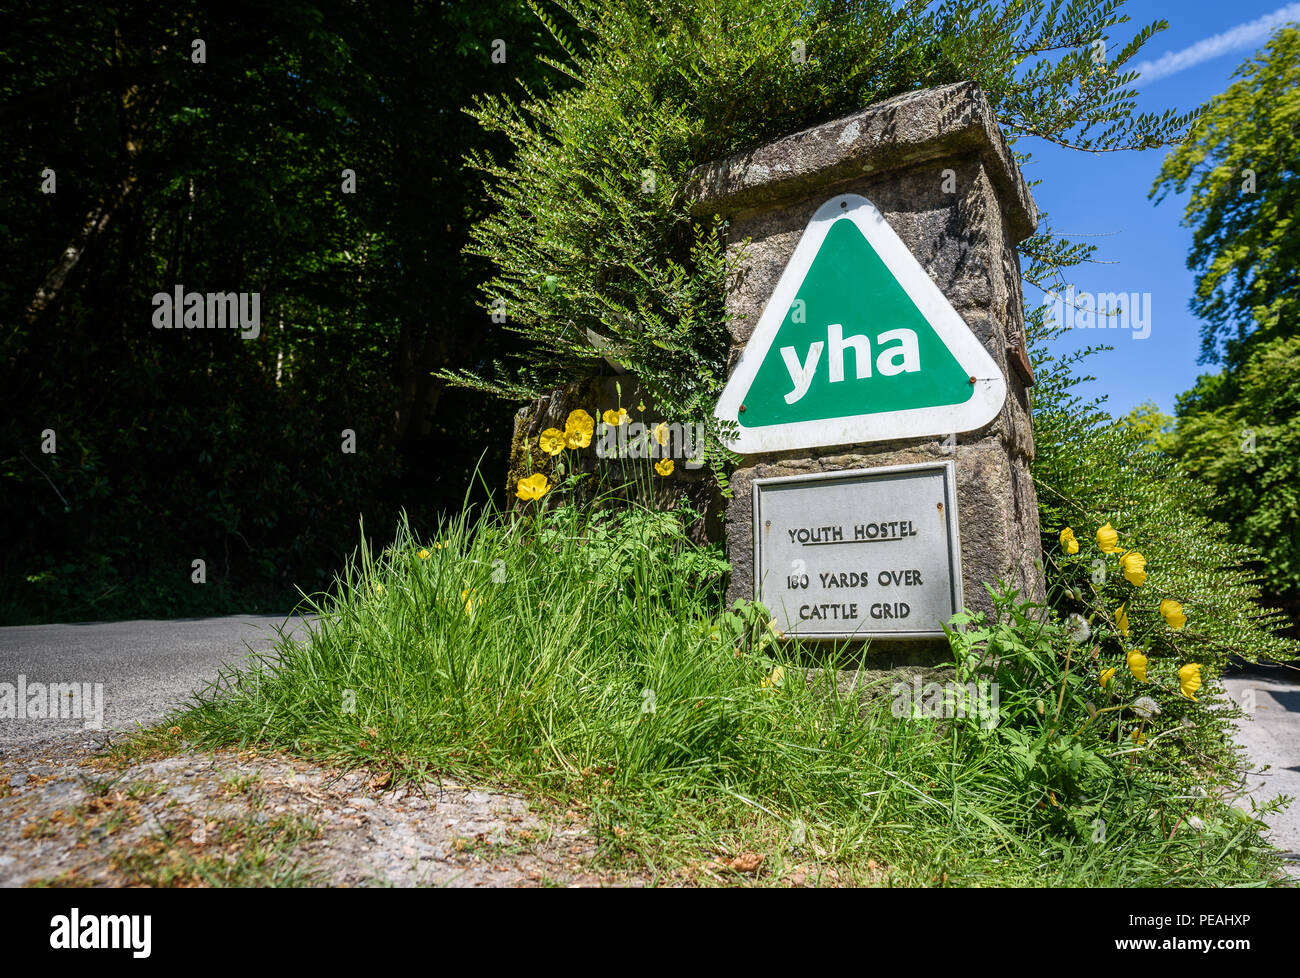 Entrance to a rural Youth Hostel in Great Britain. Stock Photo